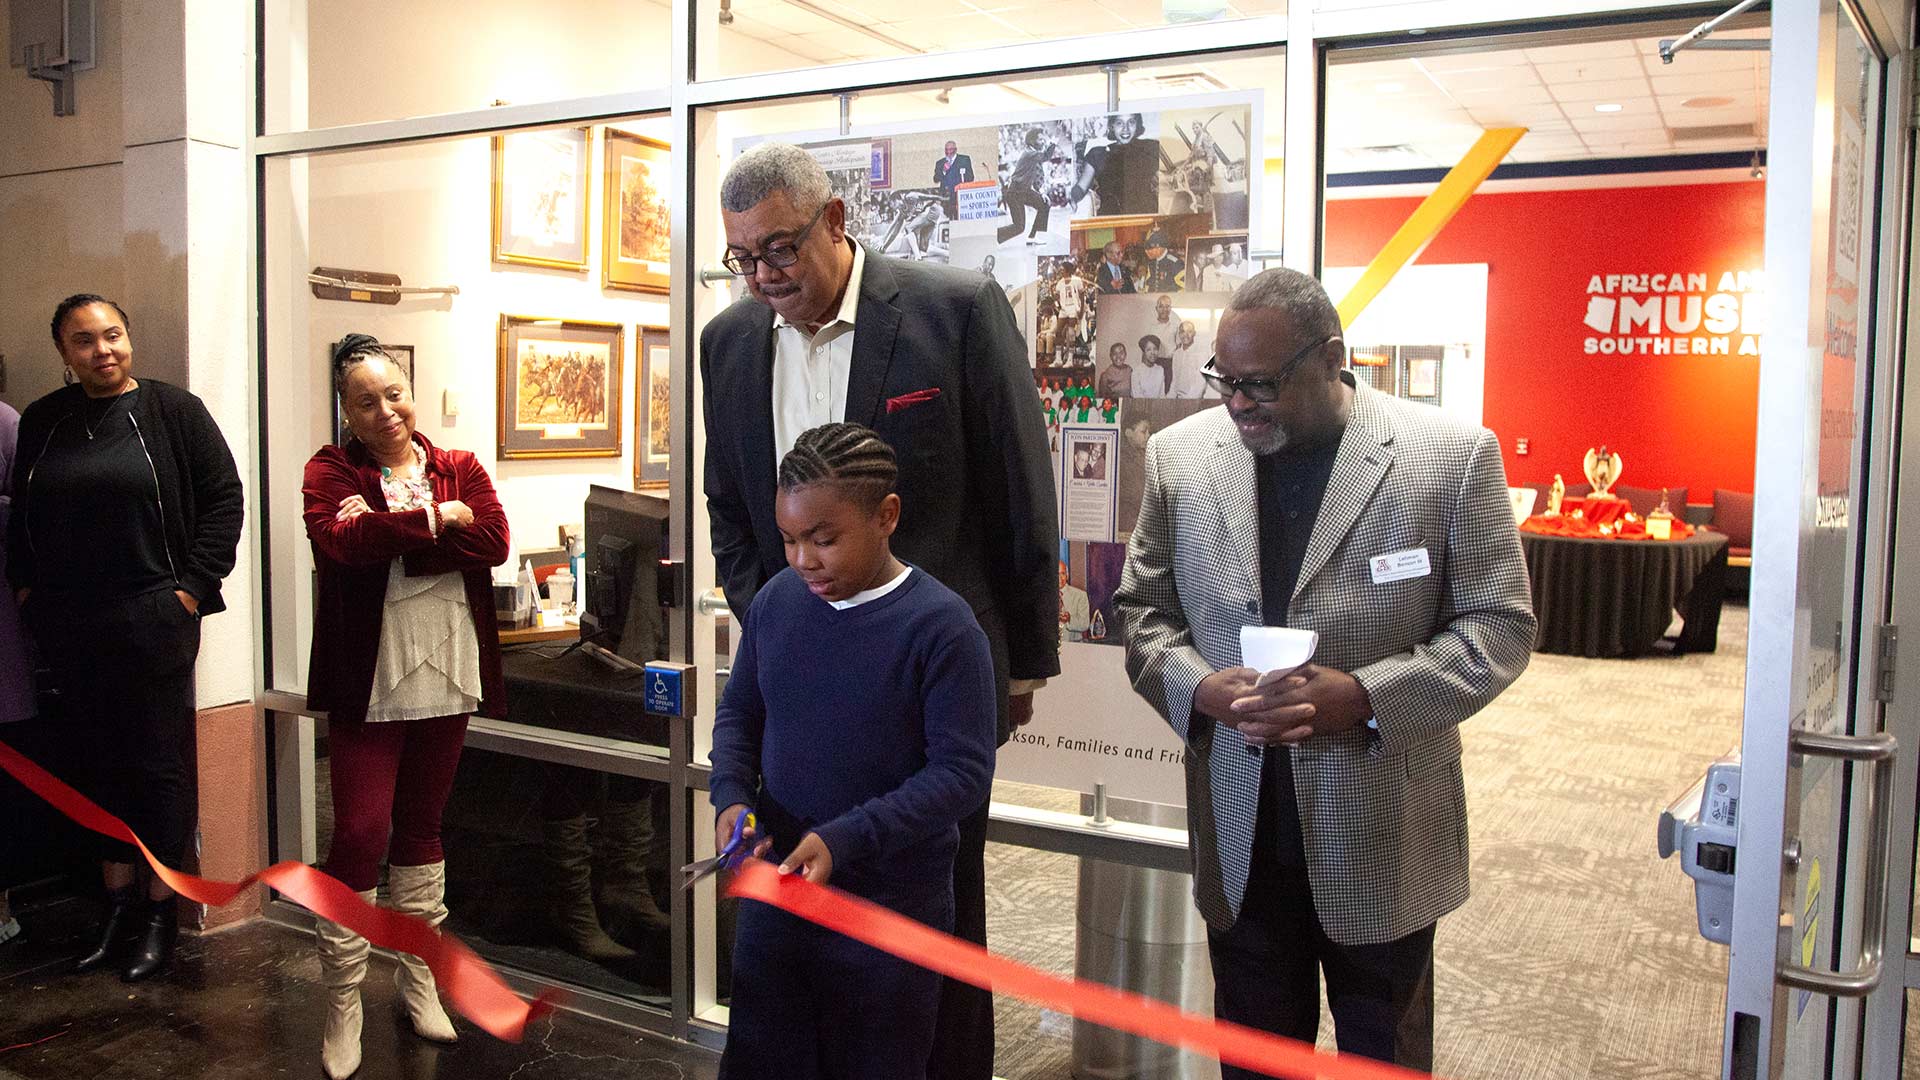 9-year-old Jody cuts the ribbon of the new African American Museum of Southern Arizona on Saturday, Jan. 14, 2023. Jody sparked the idea of creating the museum when he found out there was not a spot in Tucson that shares Black history. 